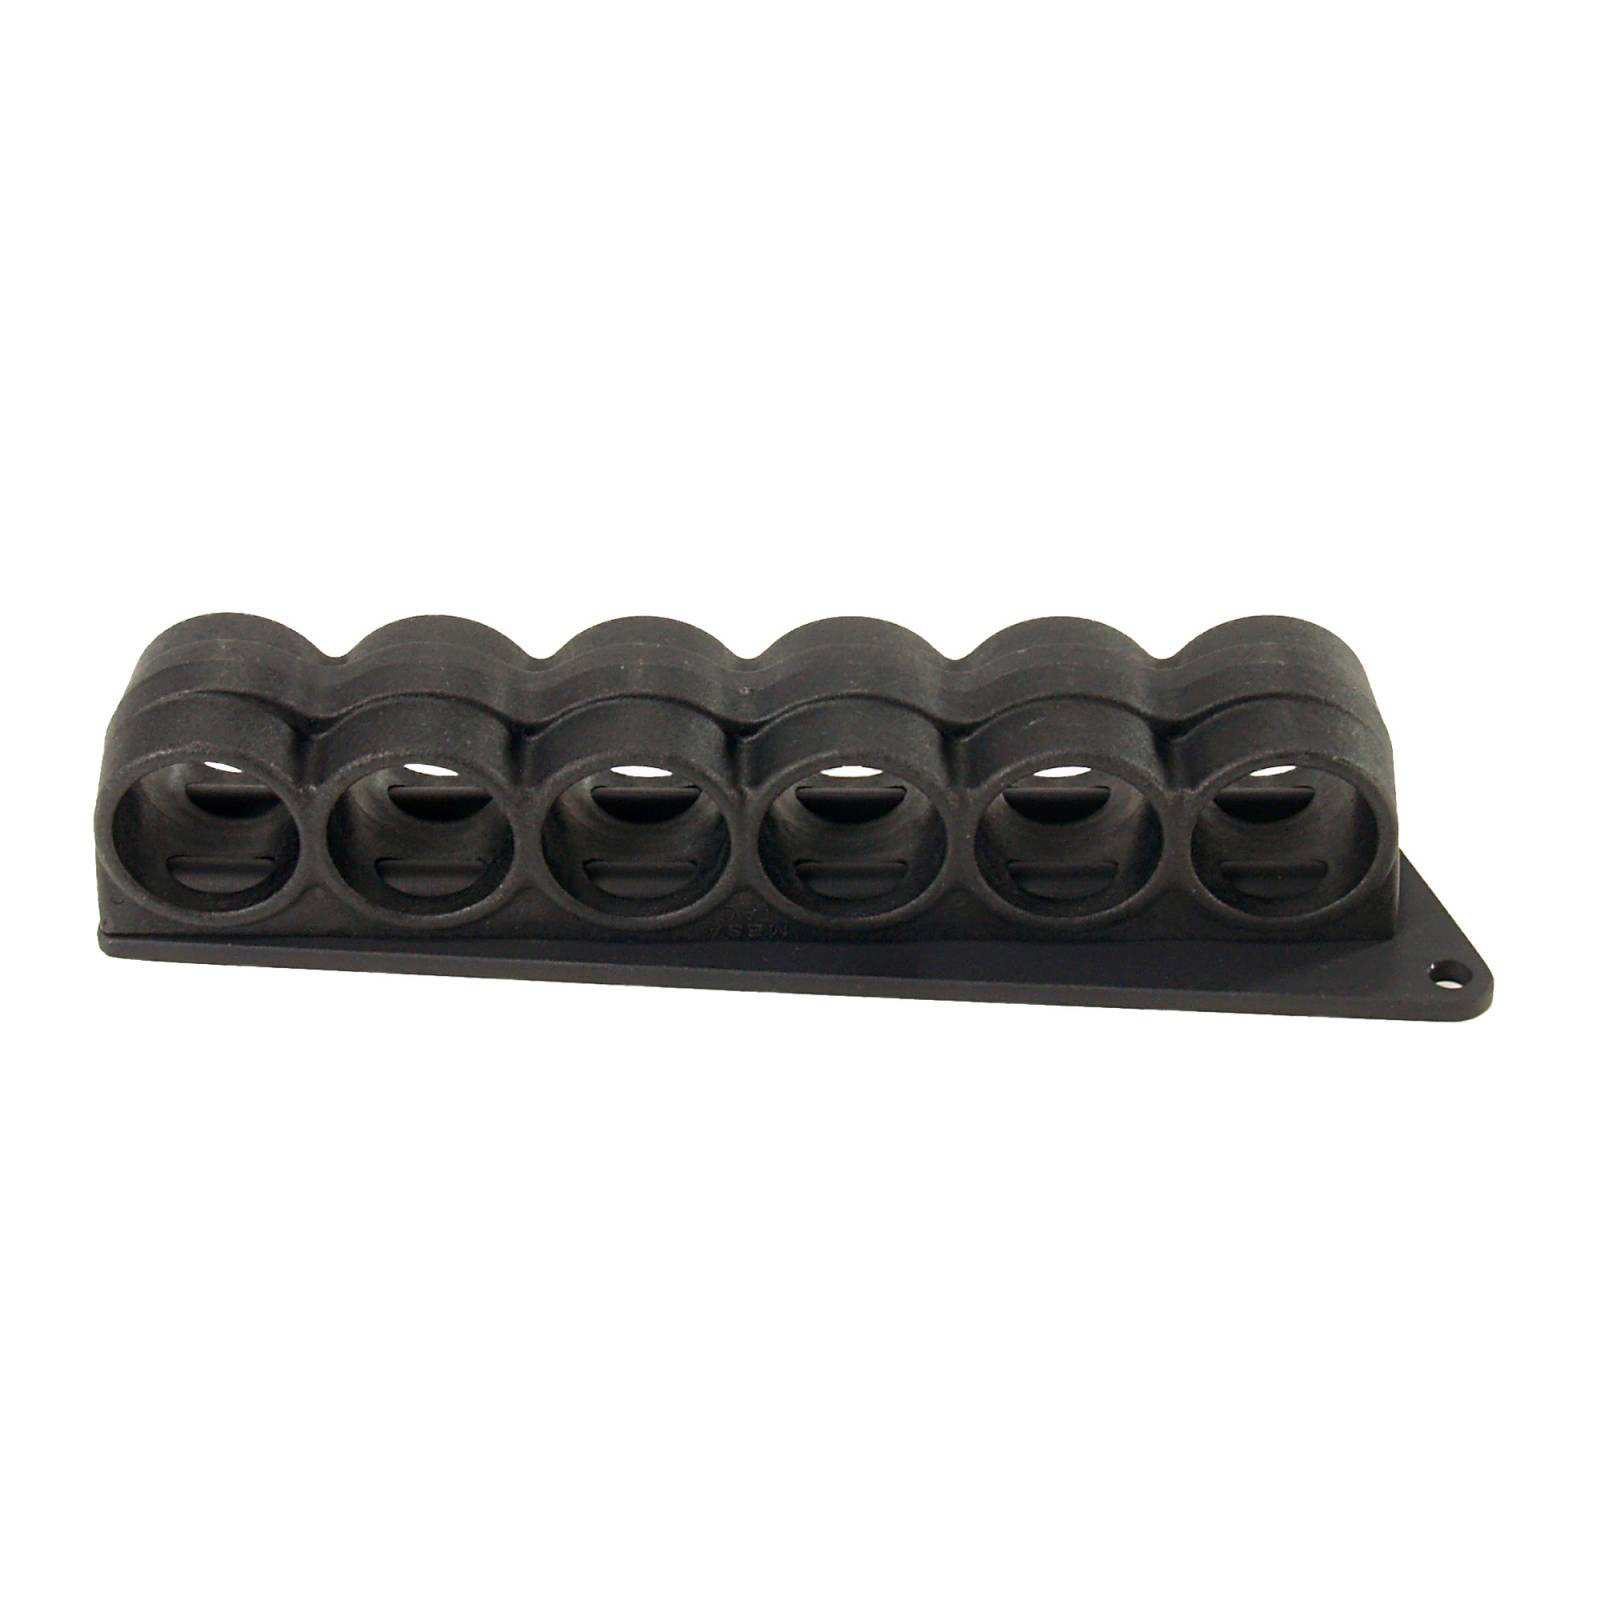 Mesa Tactical 12g SureShell Ply Carrier Fits Mossberg 500 94750 for sale online 